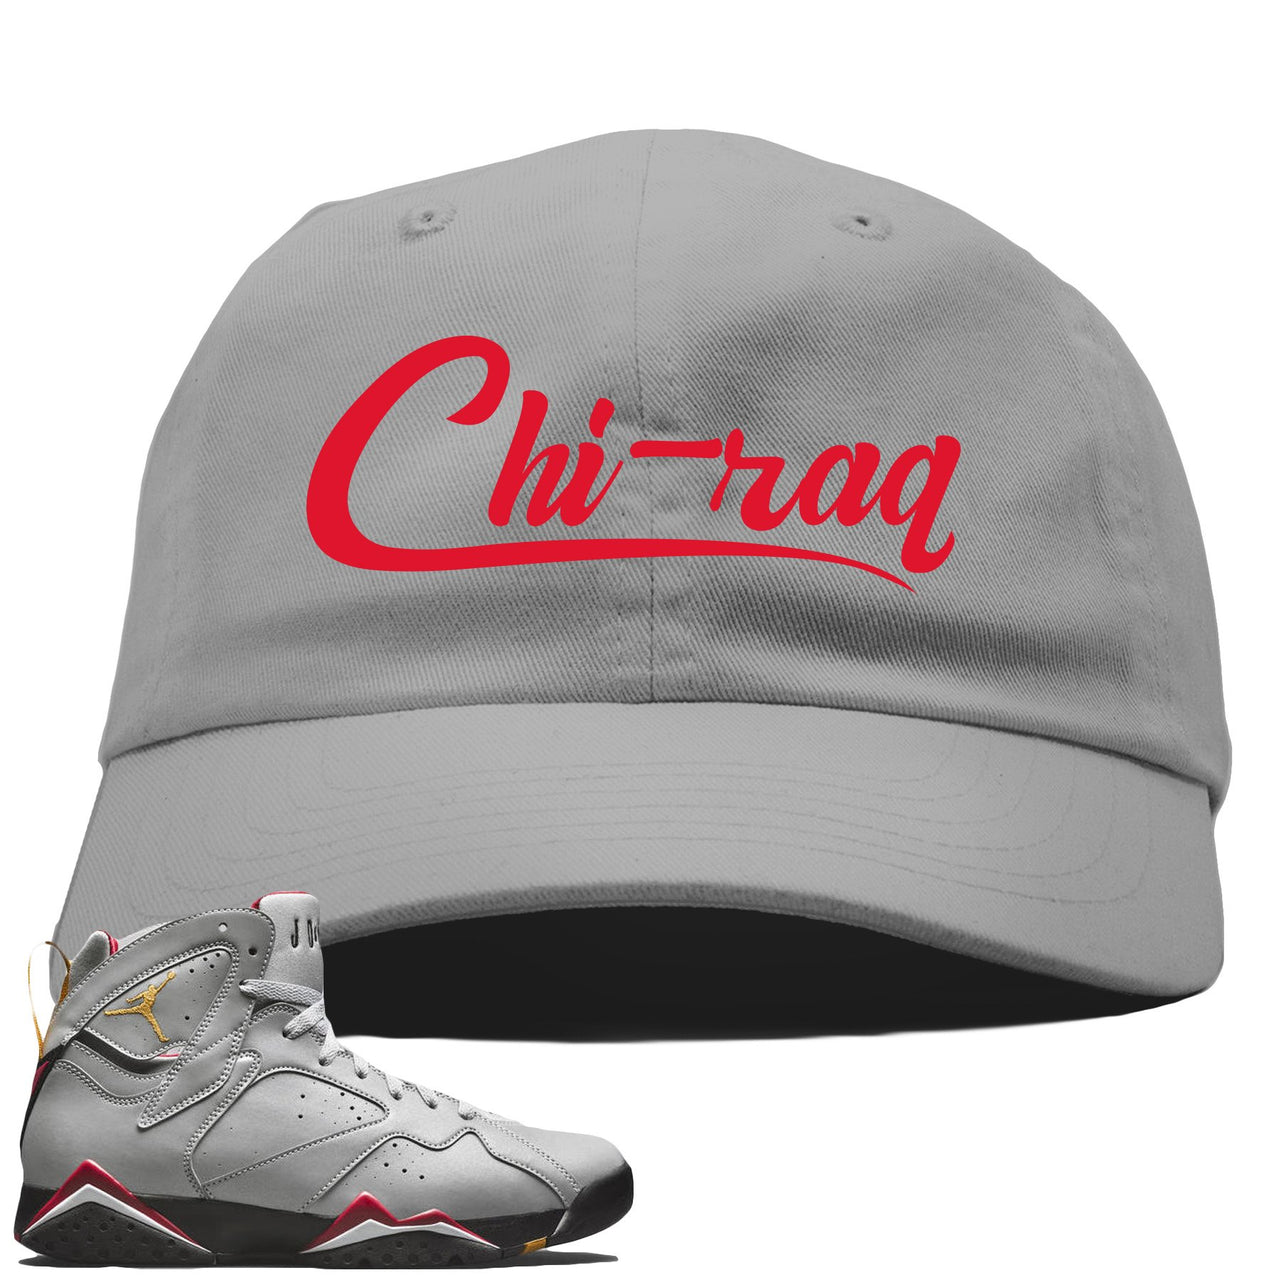 Reflections of a Champion 7s Dad Hat | Chiraq Script, Gray